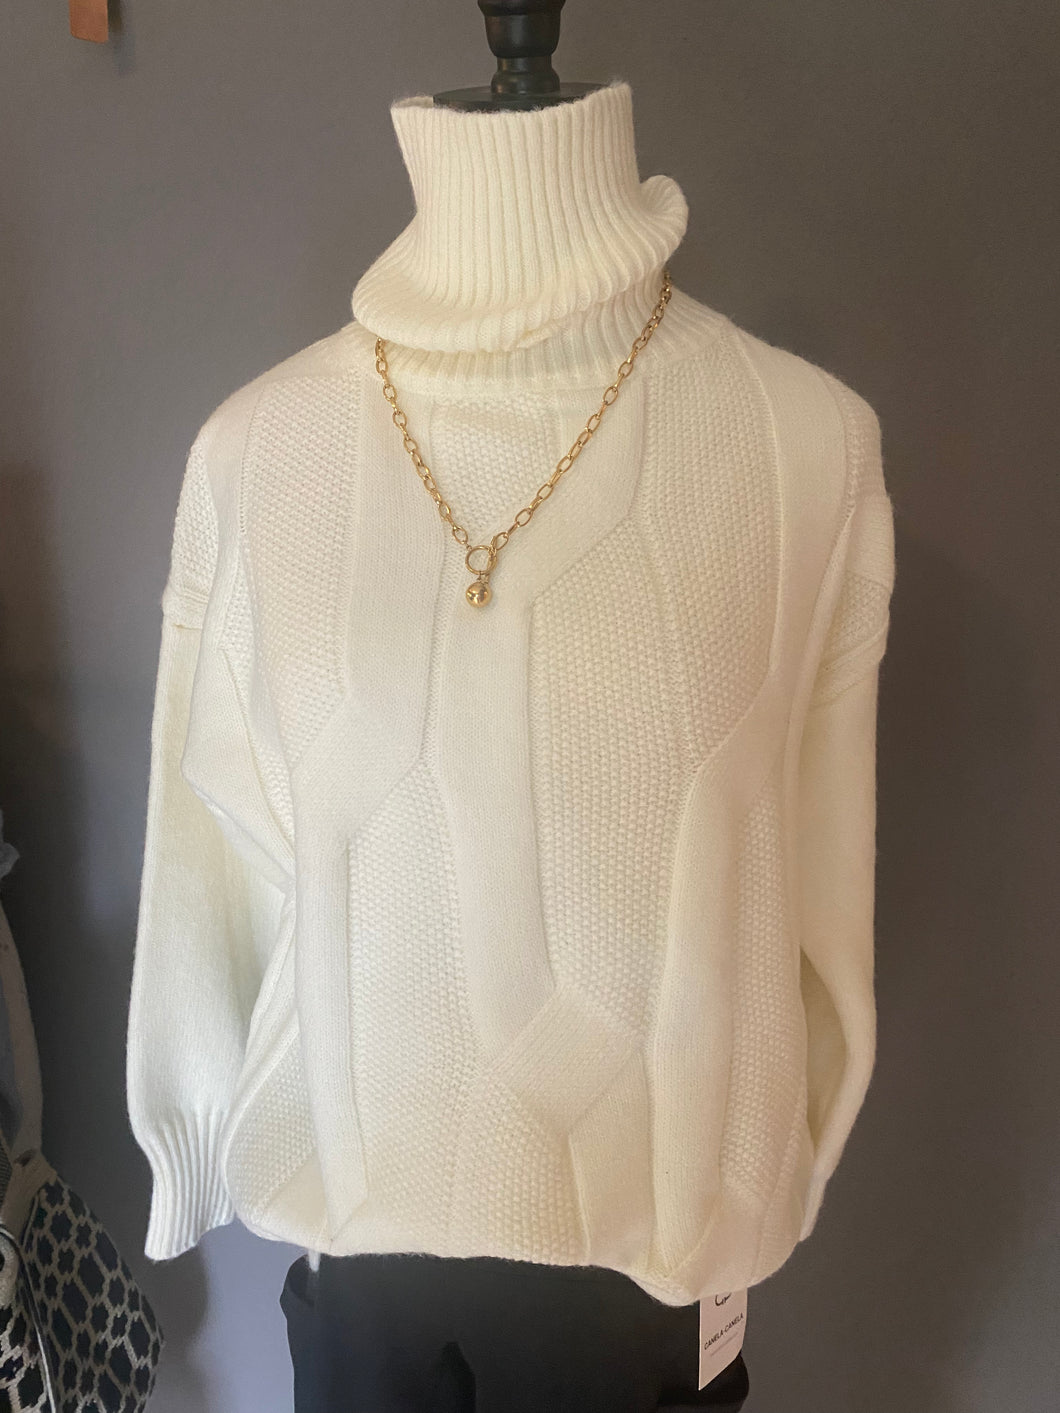 Ivory cable knit sweater